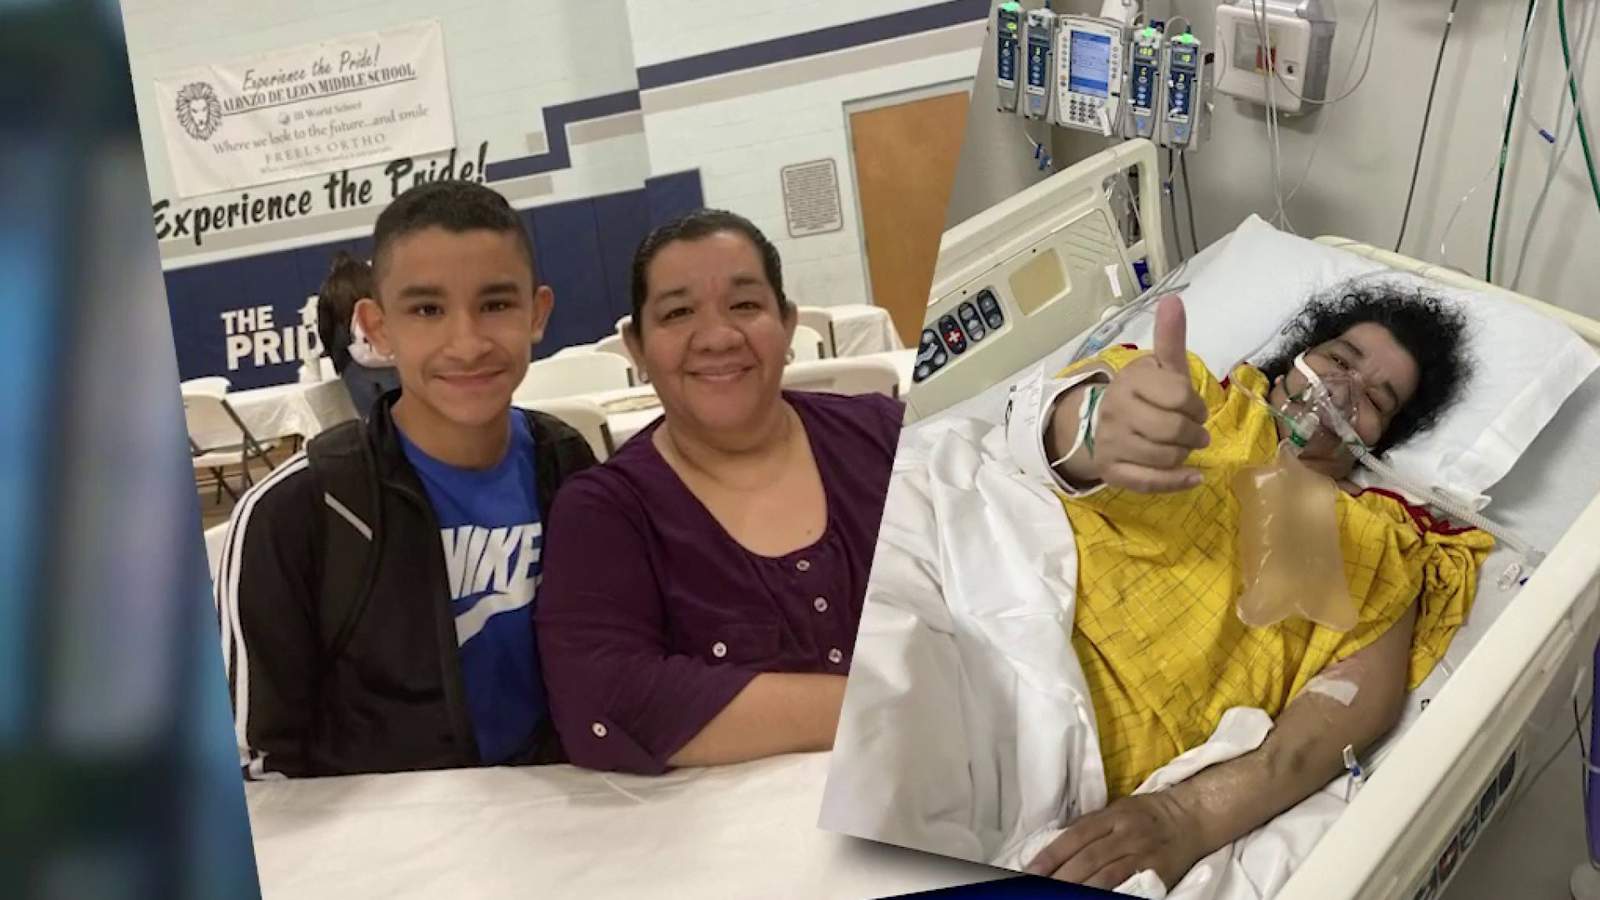 Rio Grande Valley teenager writes Gov. Abbott letter as a last effort to help his mother survive COVID-19